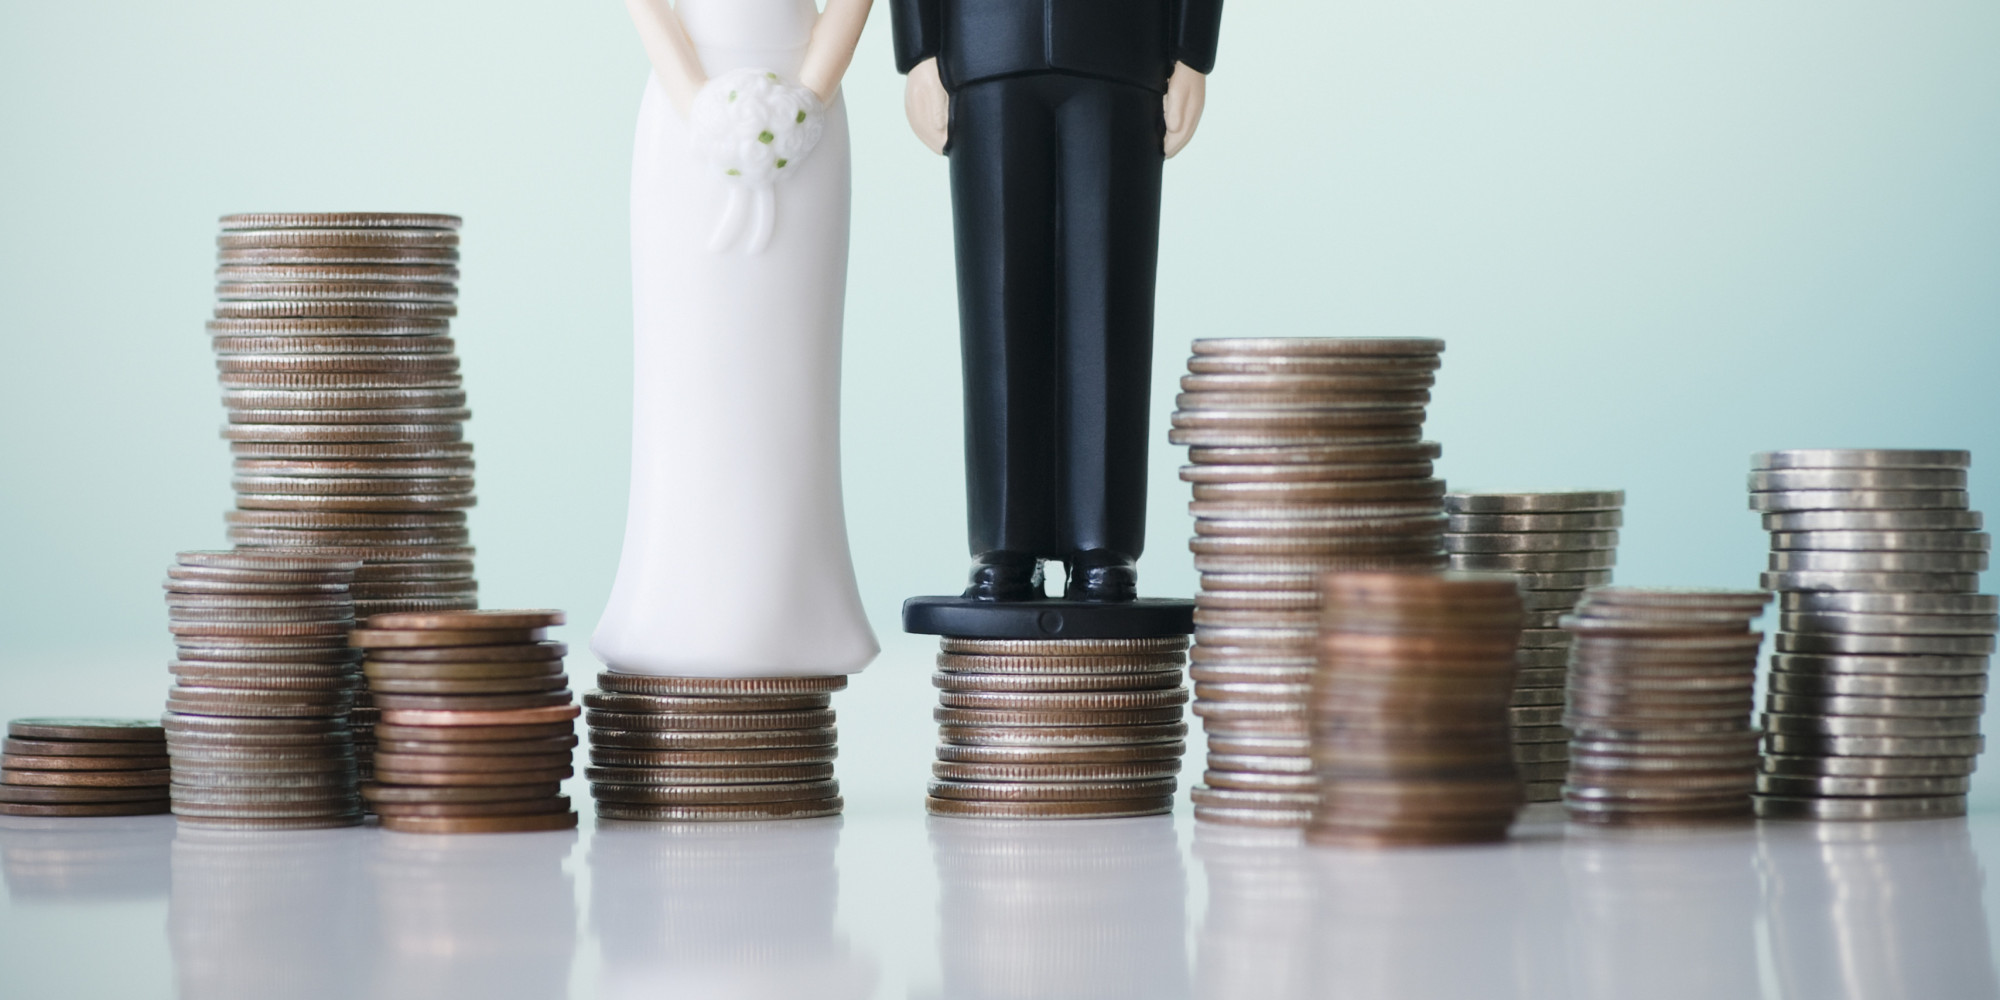 5 Detailed Tips For Managing Your Wedding Budget From Day